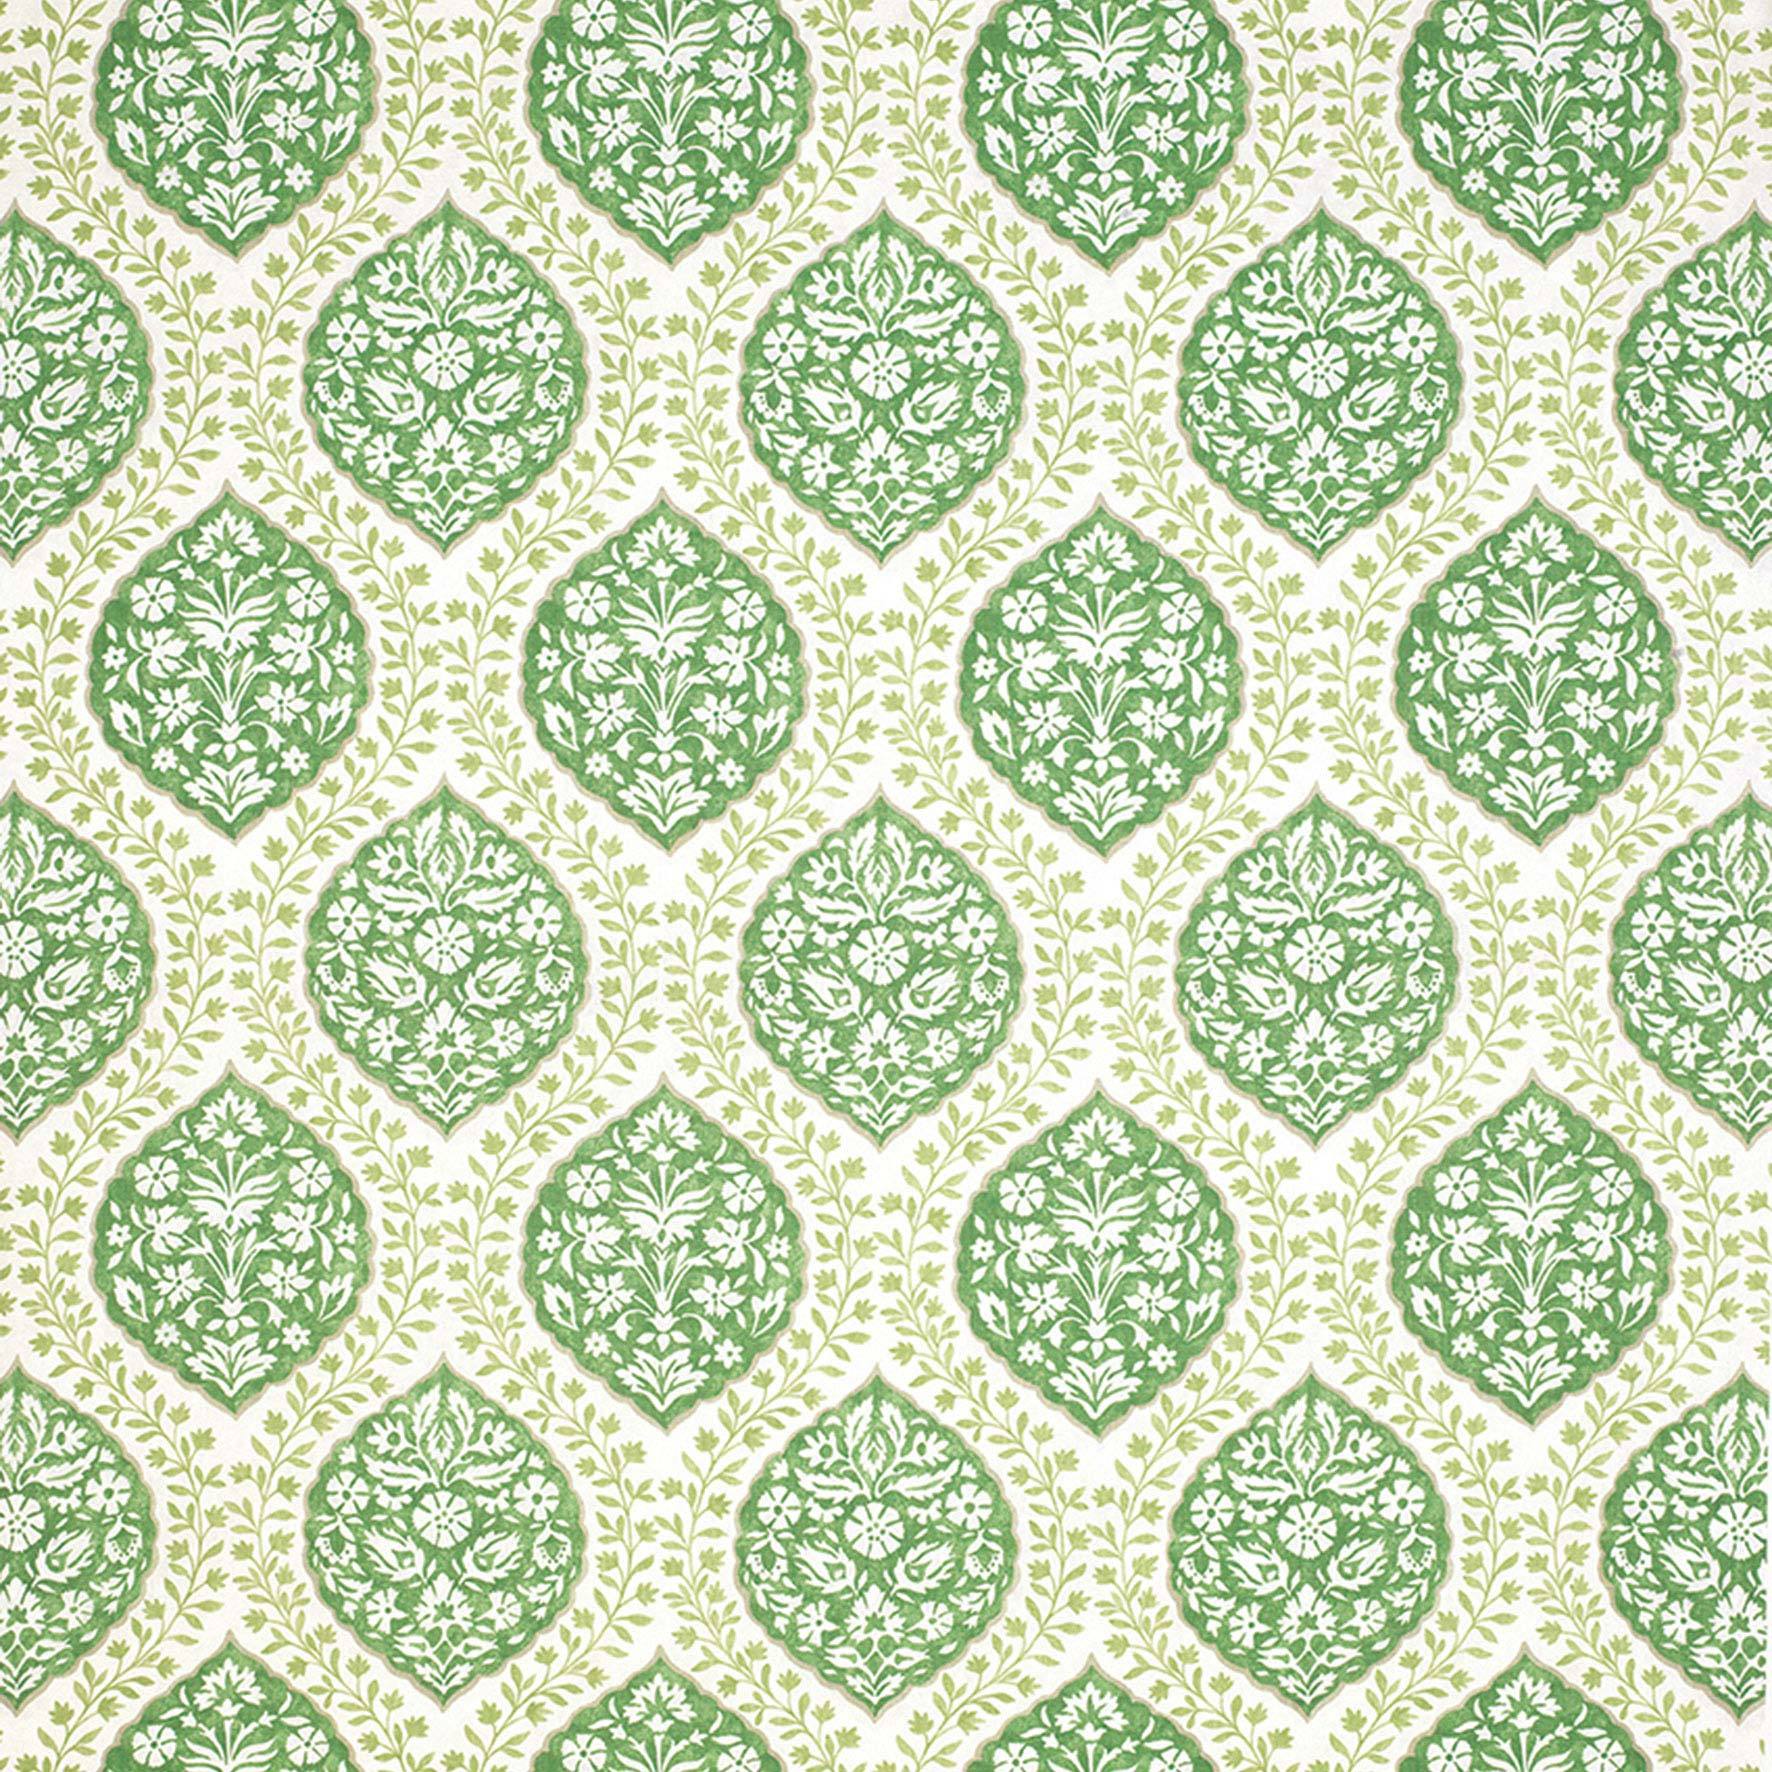 Nina Campbell Fabric - Les Rêves Marguerite Green/Ivory NCF4294-02